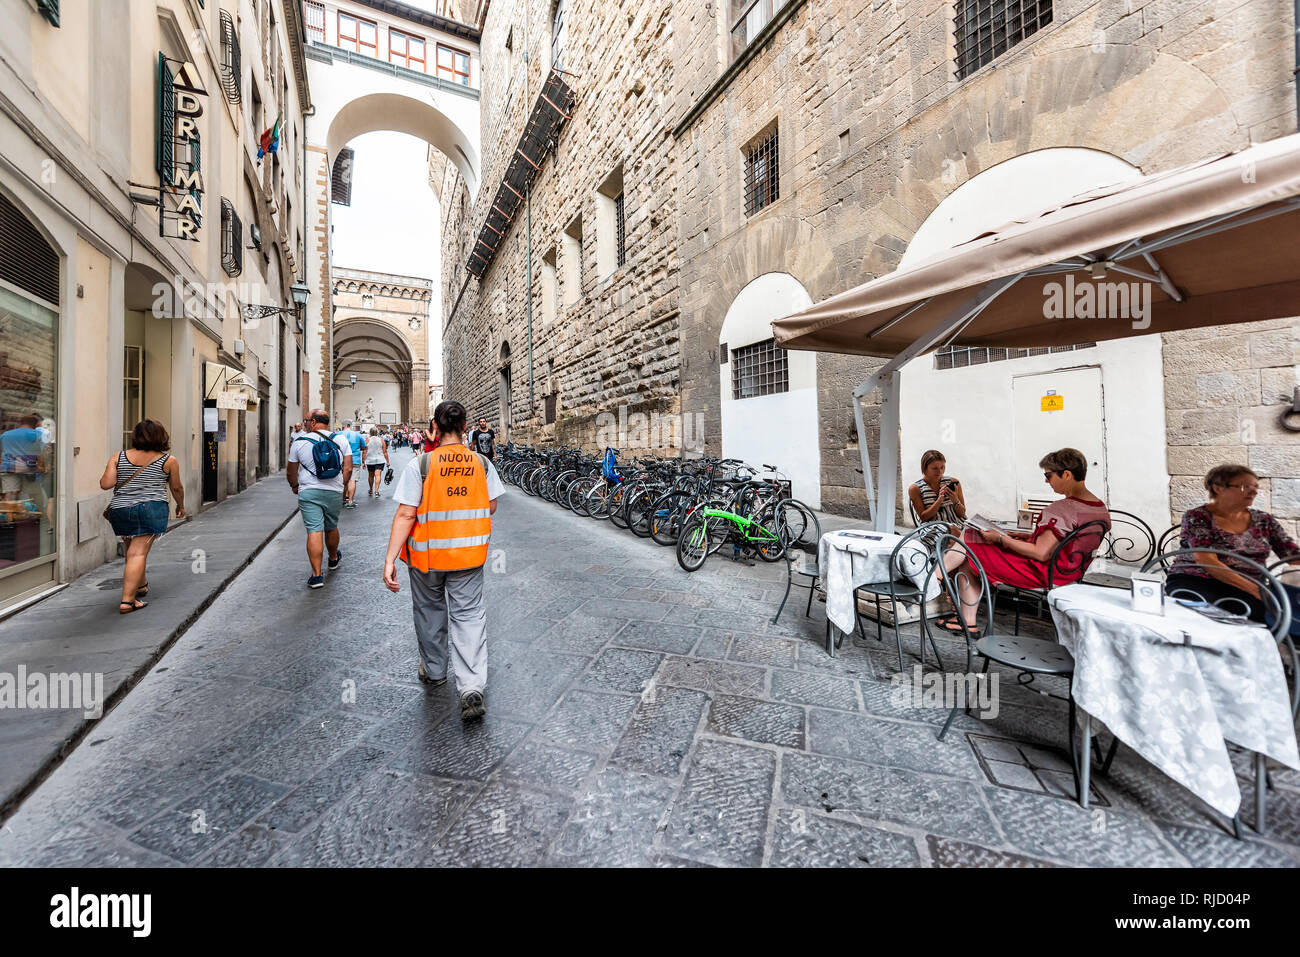 Firenze, Italy - August 30, 2018: People man Uffizi worker walking with uniform and tourists sitting in historic street in Florence Renaissance city P Stock Photo